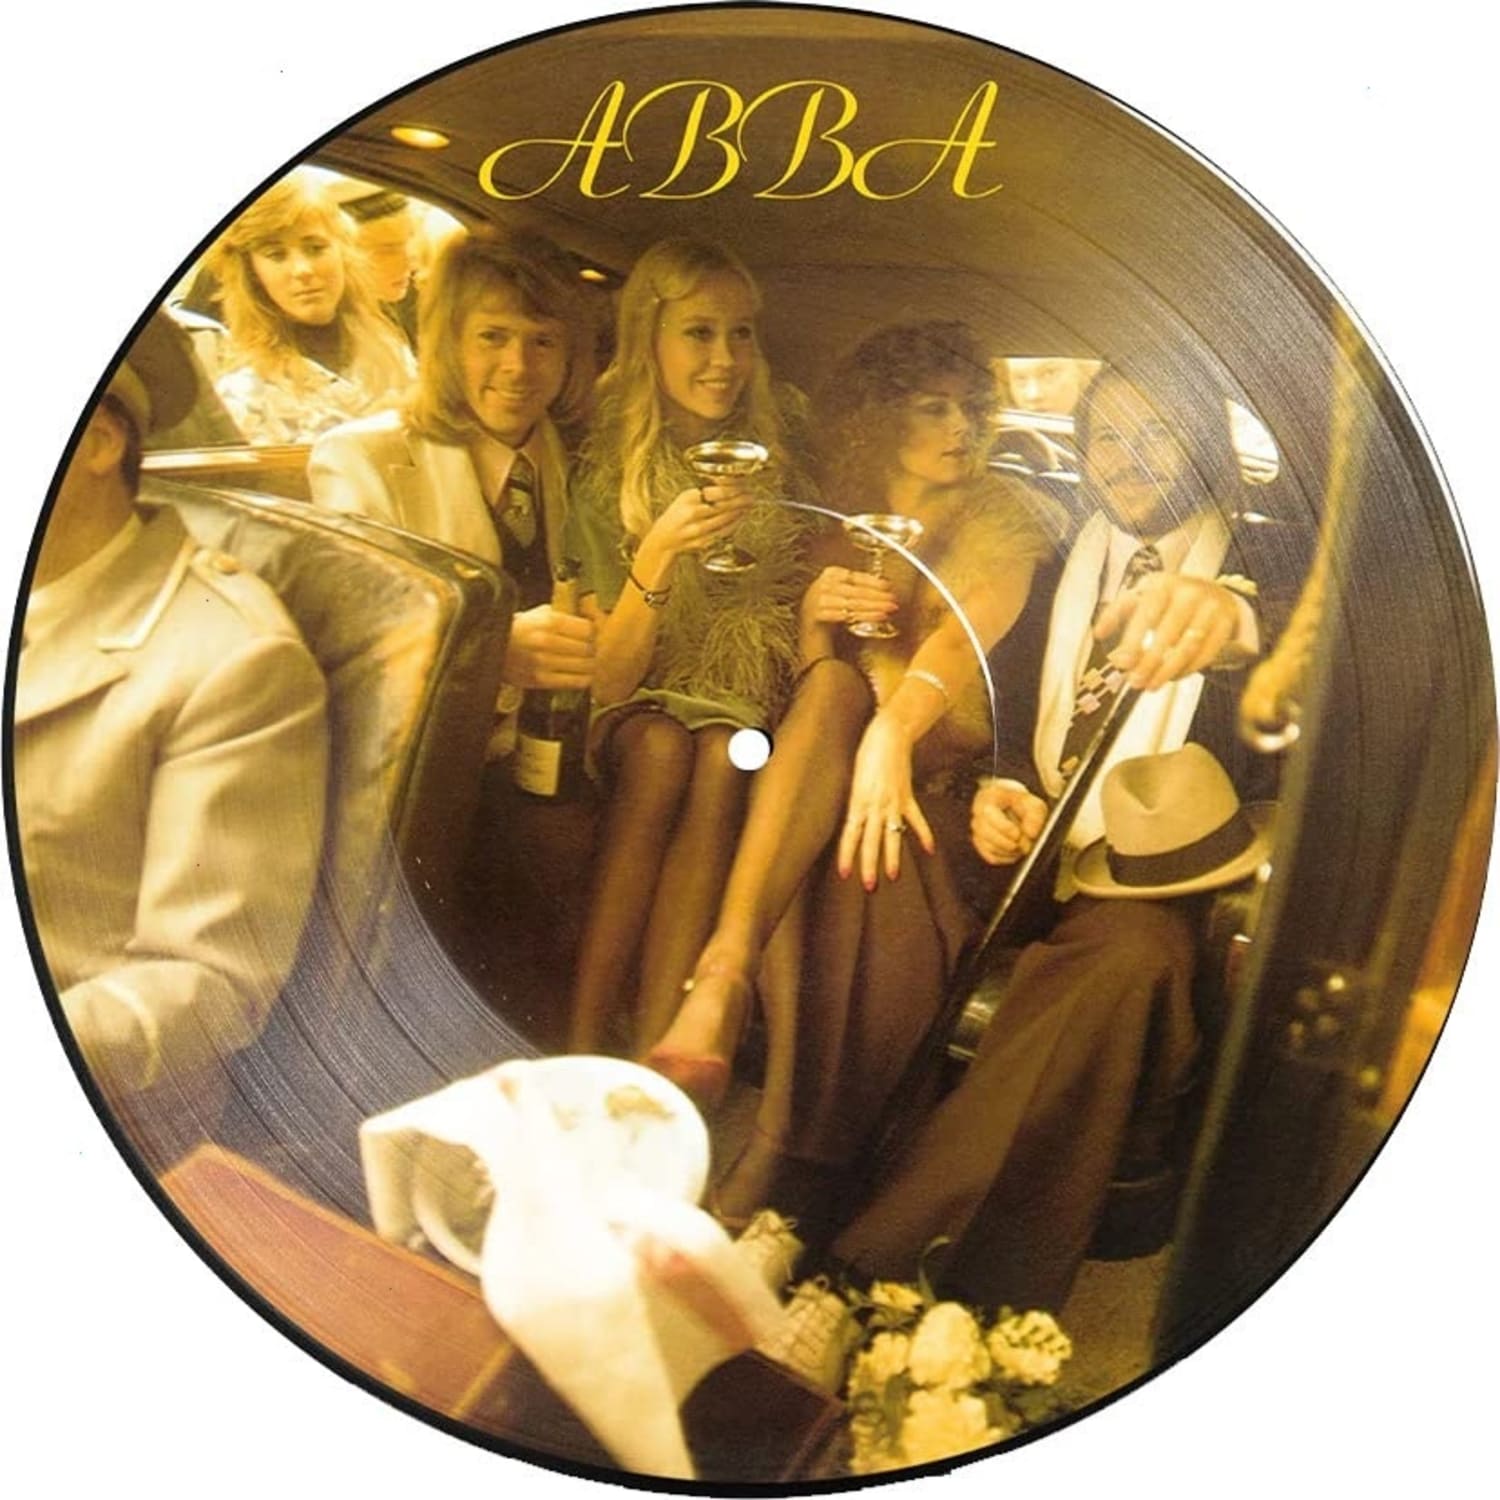 Abba – Limited Picture Disc Pressing (Vinyl LP)